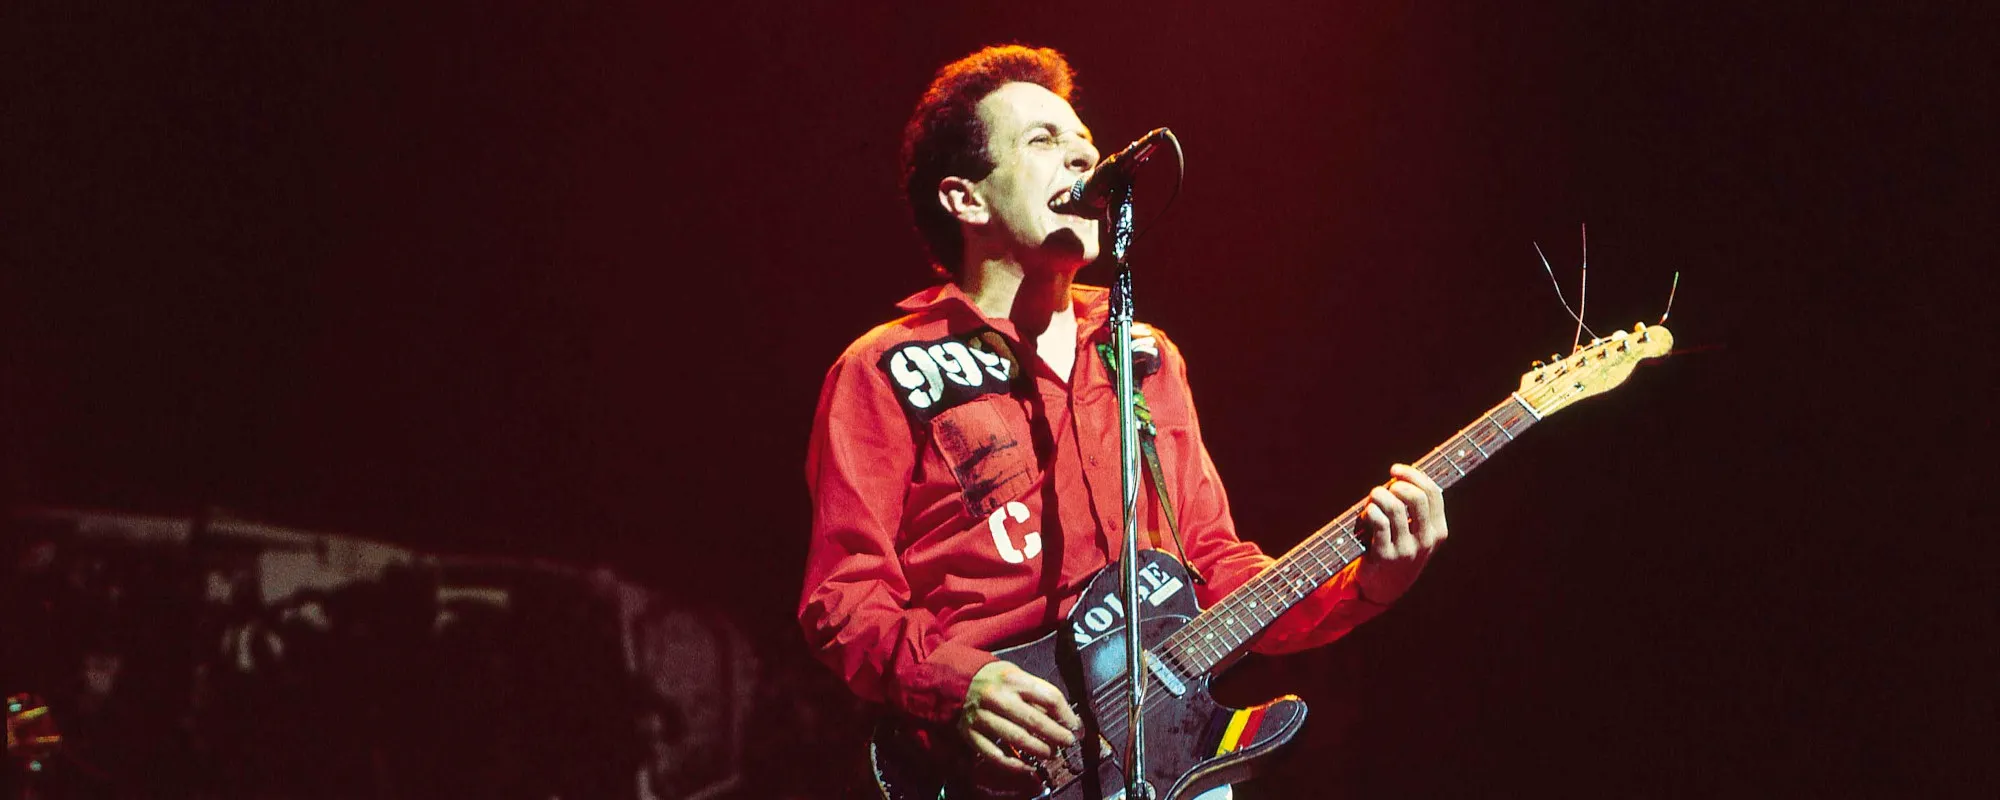 “It Was Punk Reggae, Not White Reggae”: The Story Behind “Police and Thieves” by The Clash